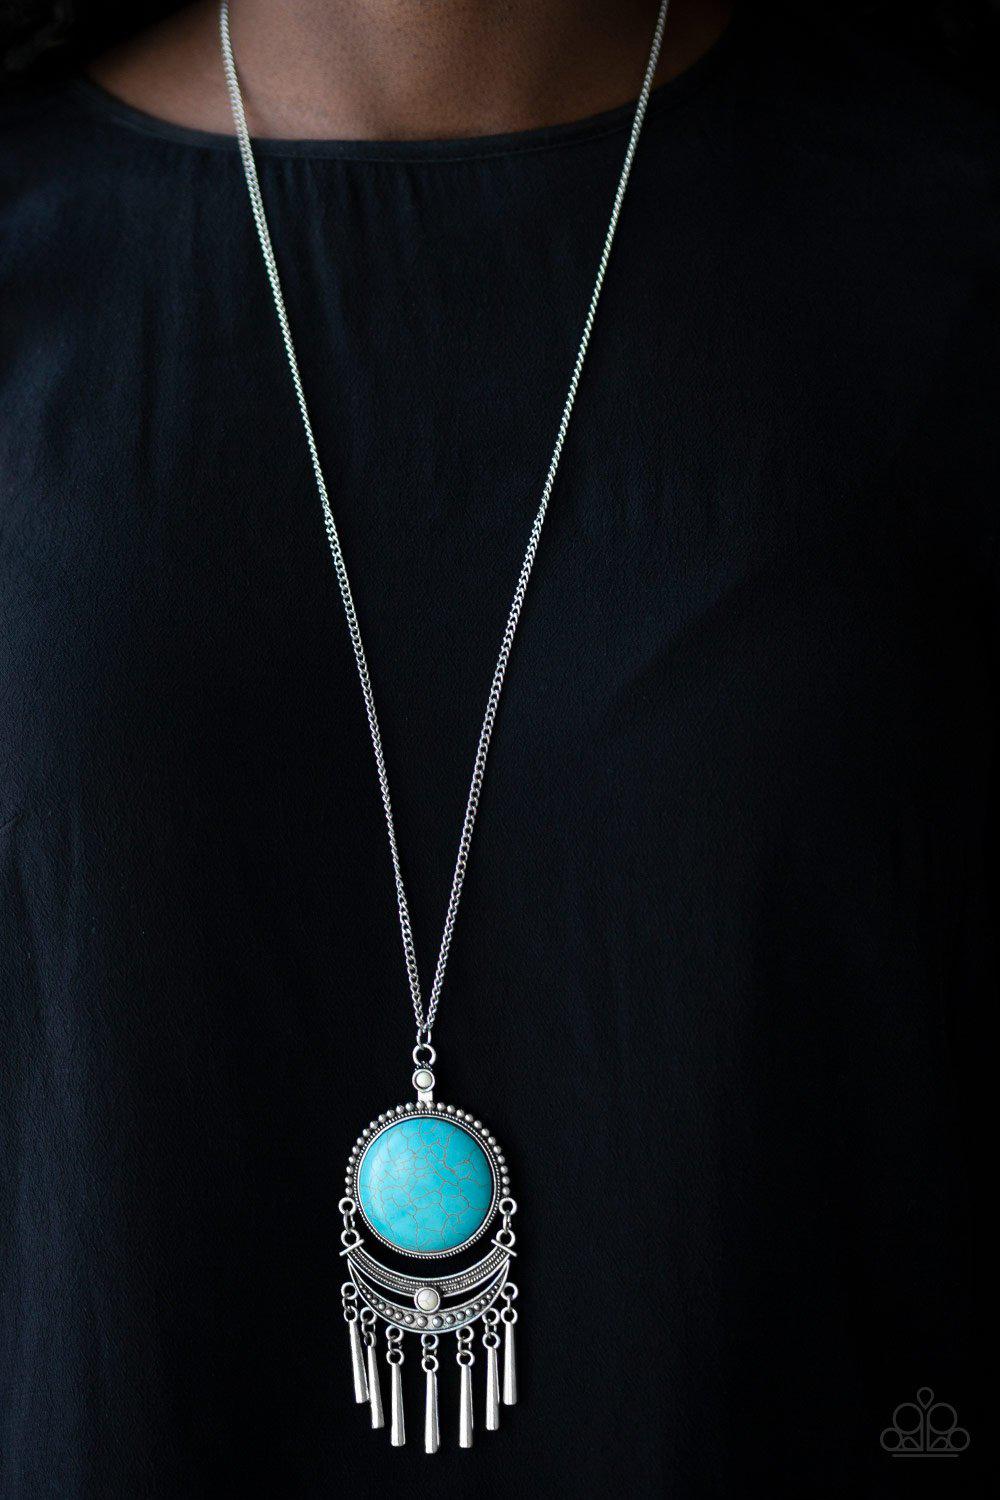 Rural Rustler Multi Turquoise Blue and White Stone Necklace - Paparazzi Accessories- model - CarasShop.com - $5 Jewelry by Cara Jewels